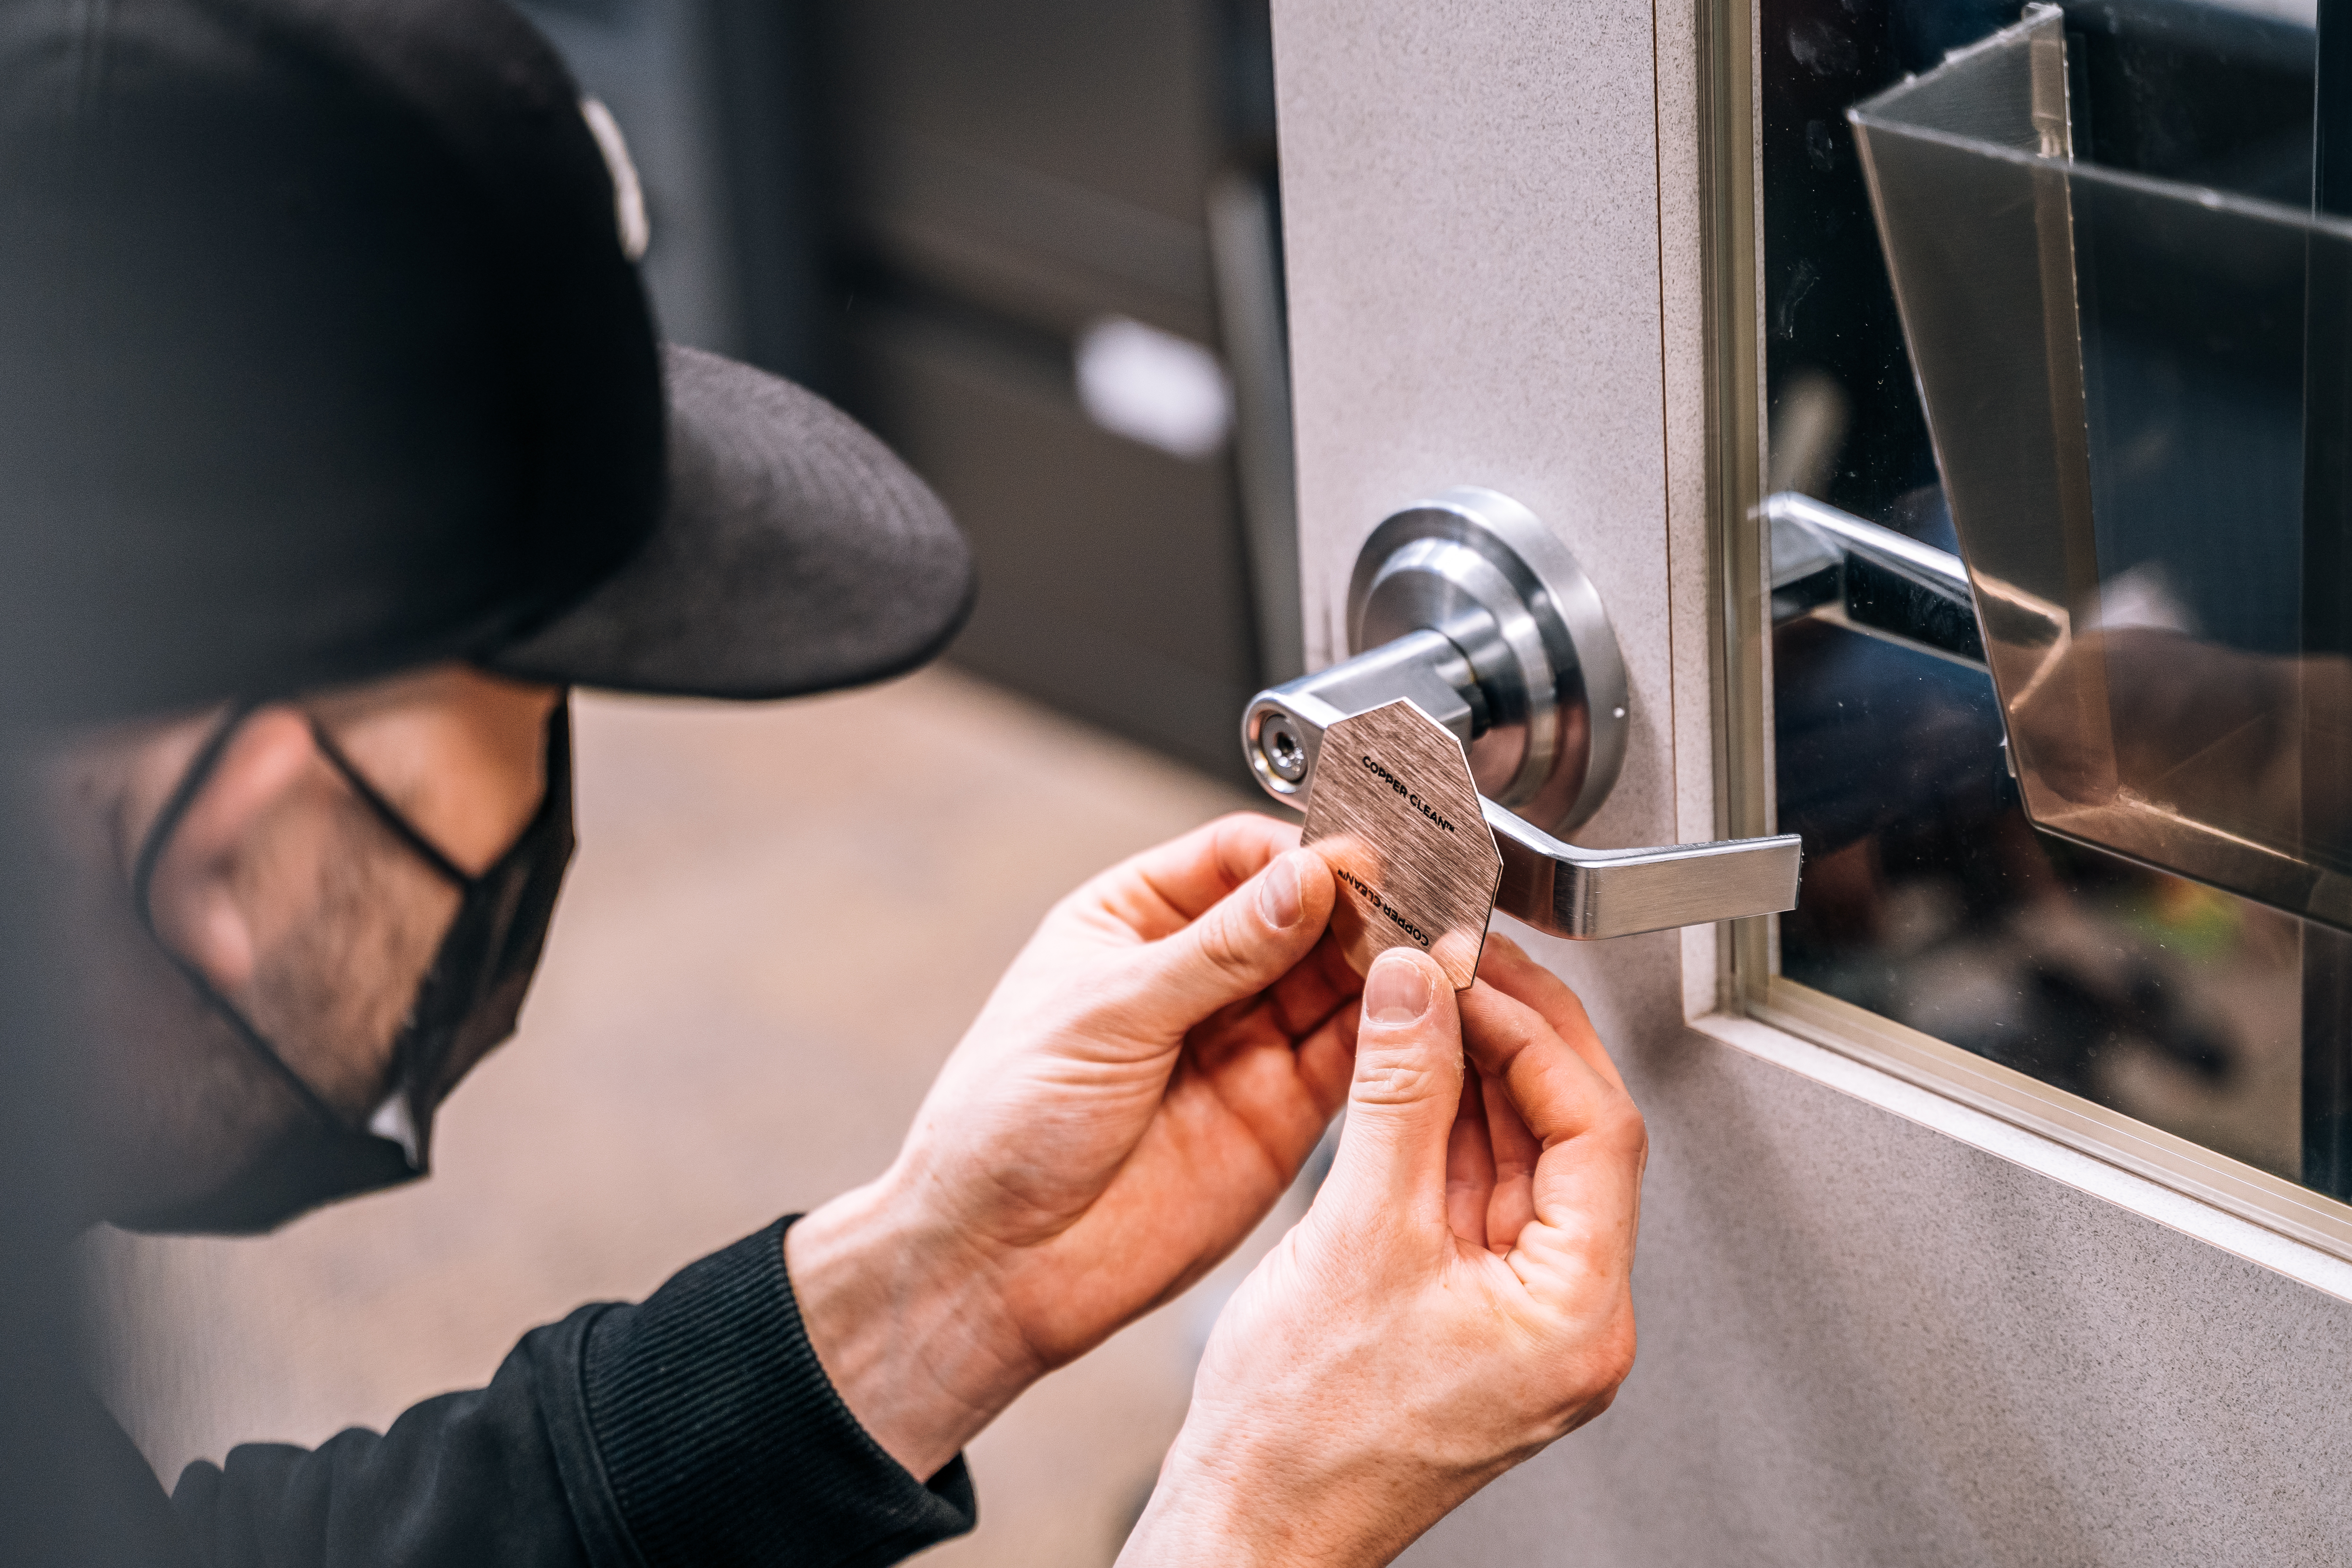 A worker wearing a face mask and baseball hat carefully installs a copper patch on a door handle